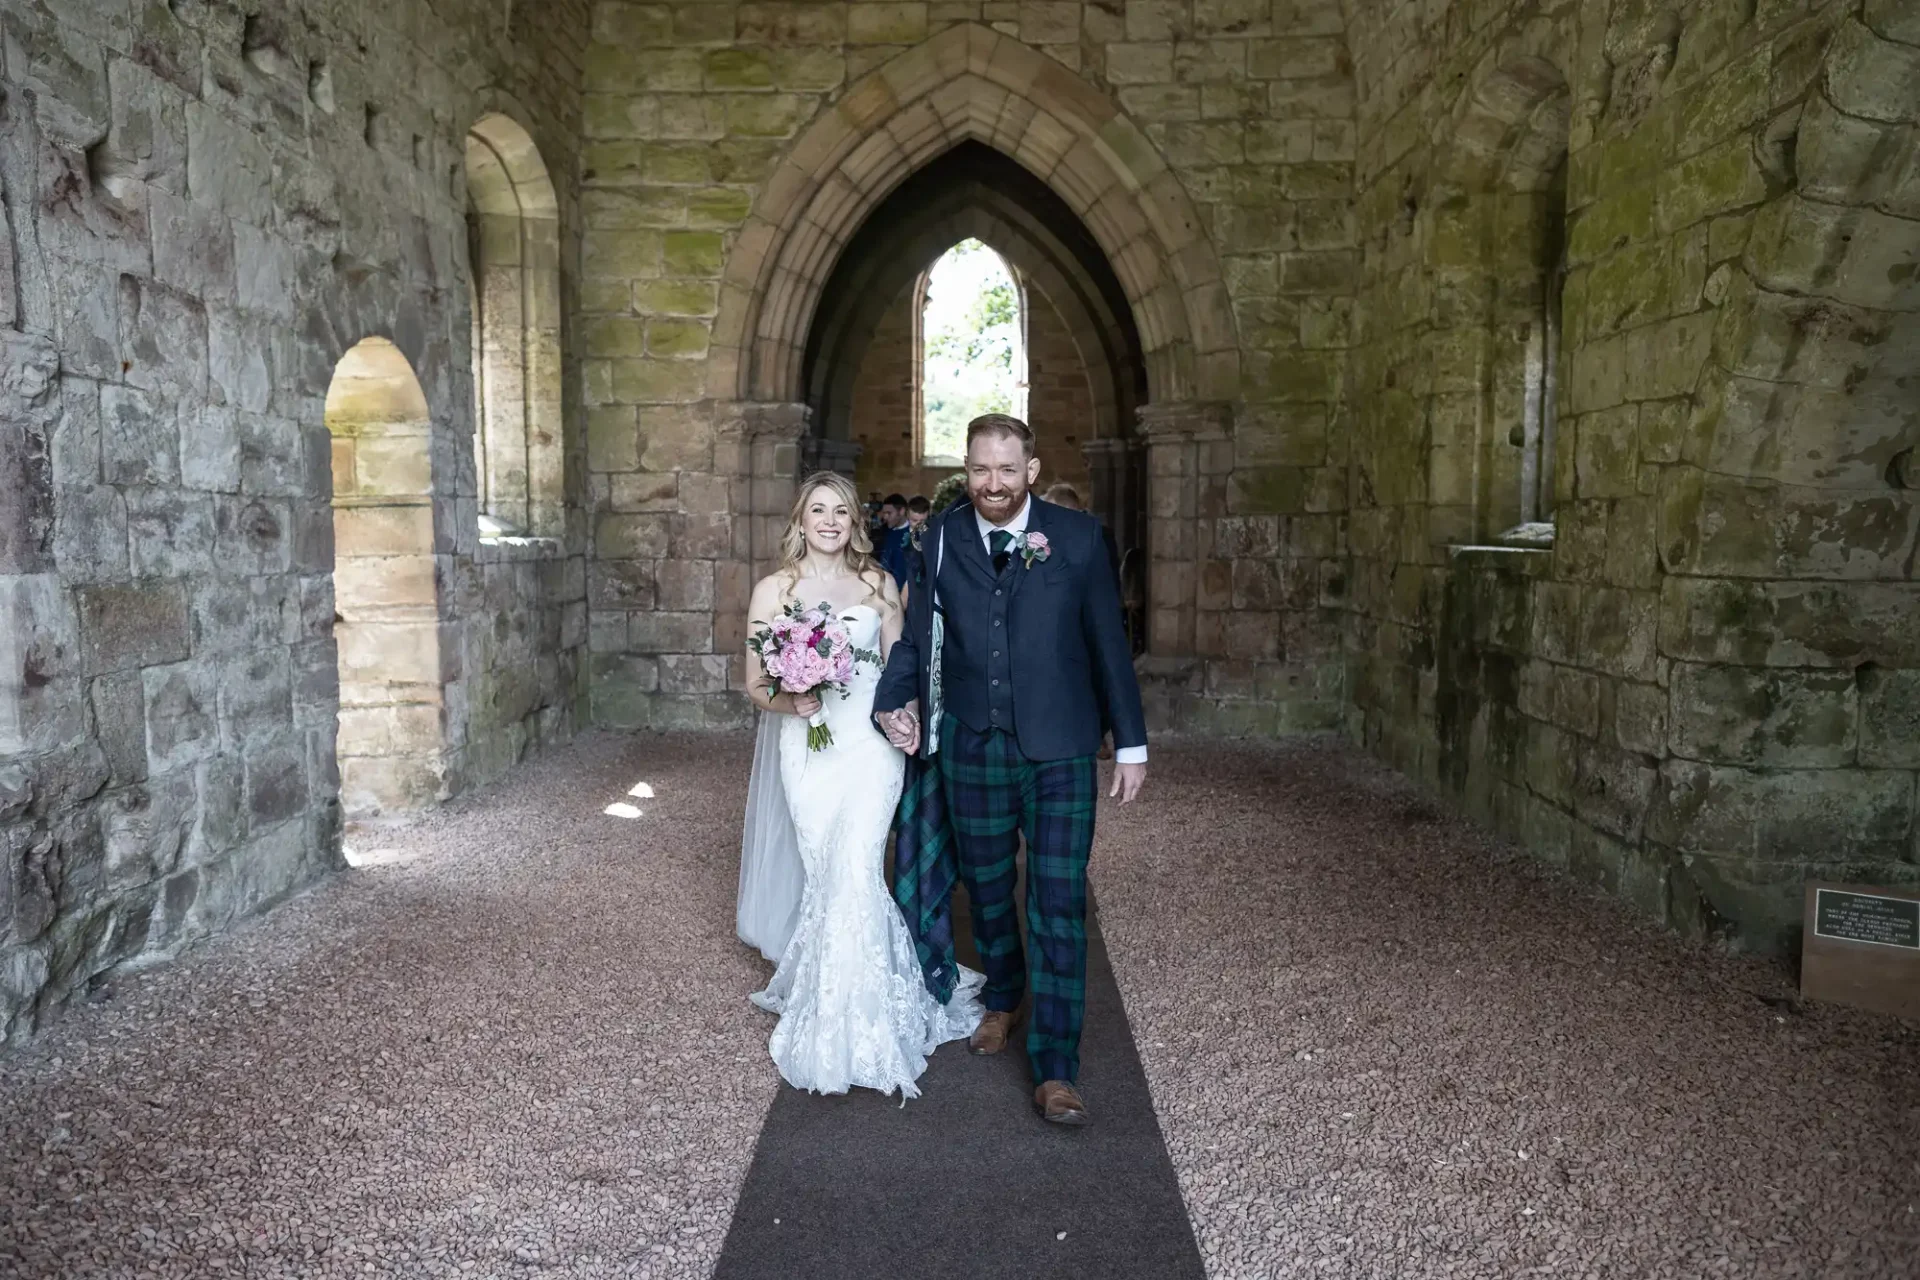 Bride and groom walking hand in hand through a stone archway at a historic site, the groom wearing a tartan kilt.